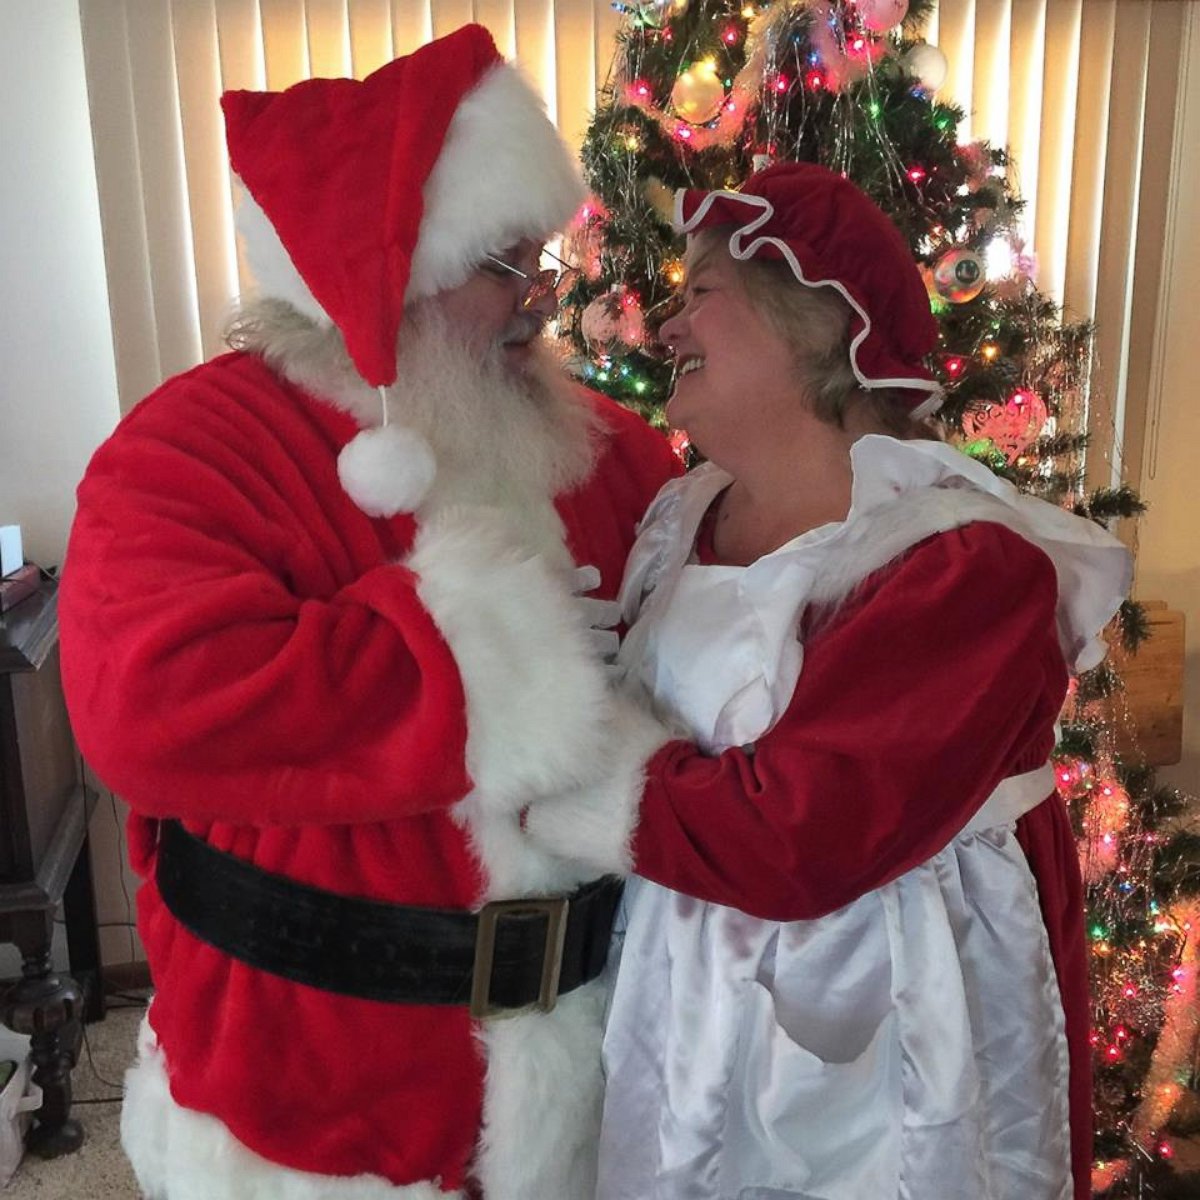 PHOTO: Jeff and Mary Brookstein of Omaha, Nebraska, officially changed their names to Santa and Merry Christmas Claus.